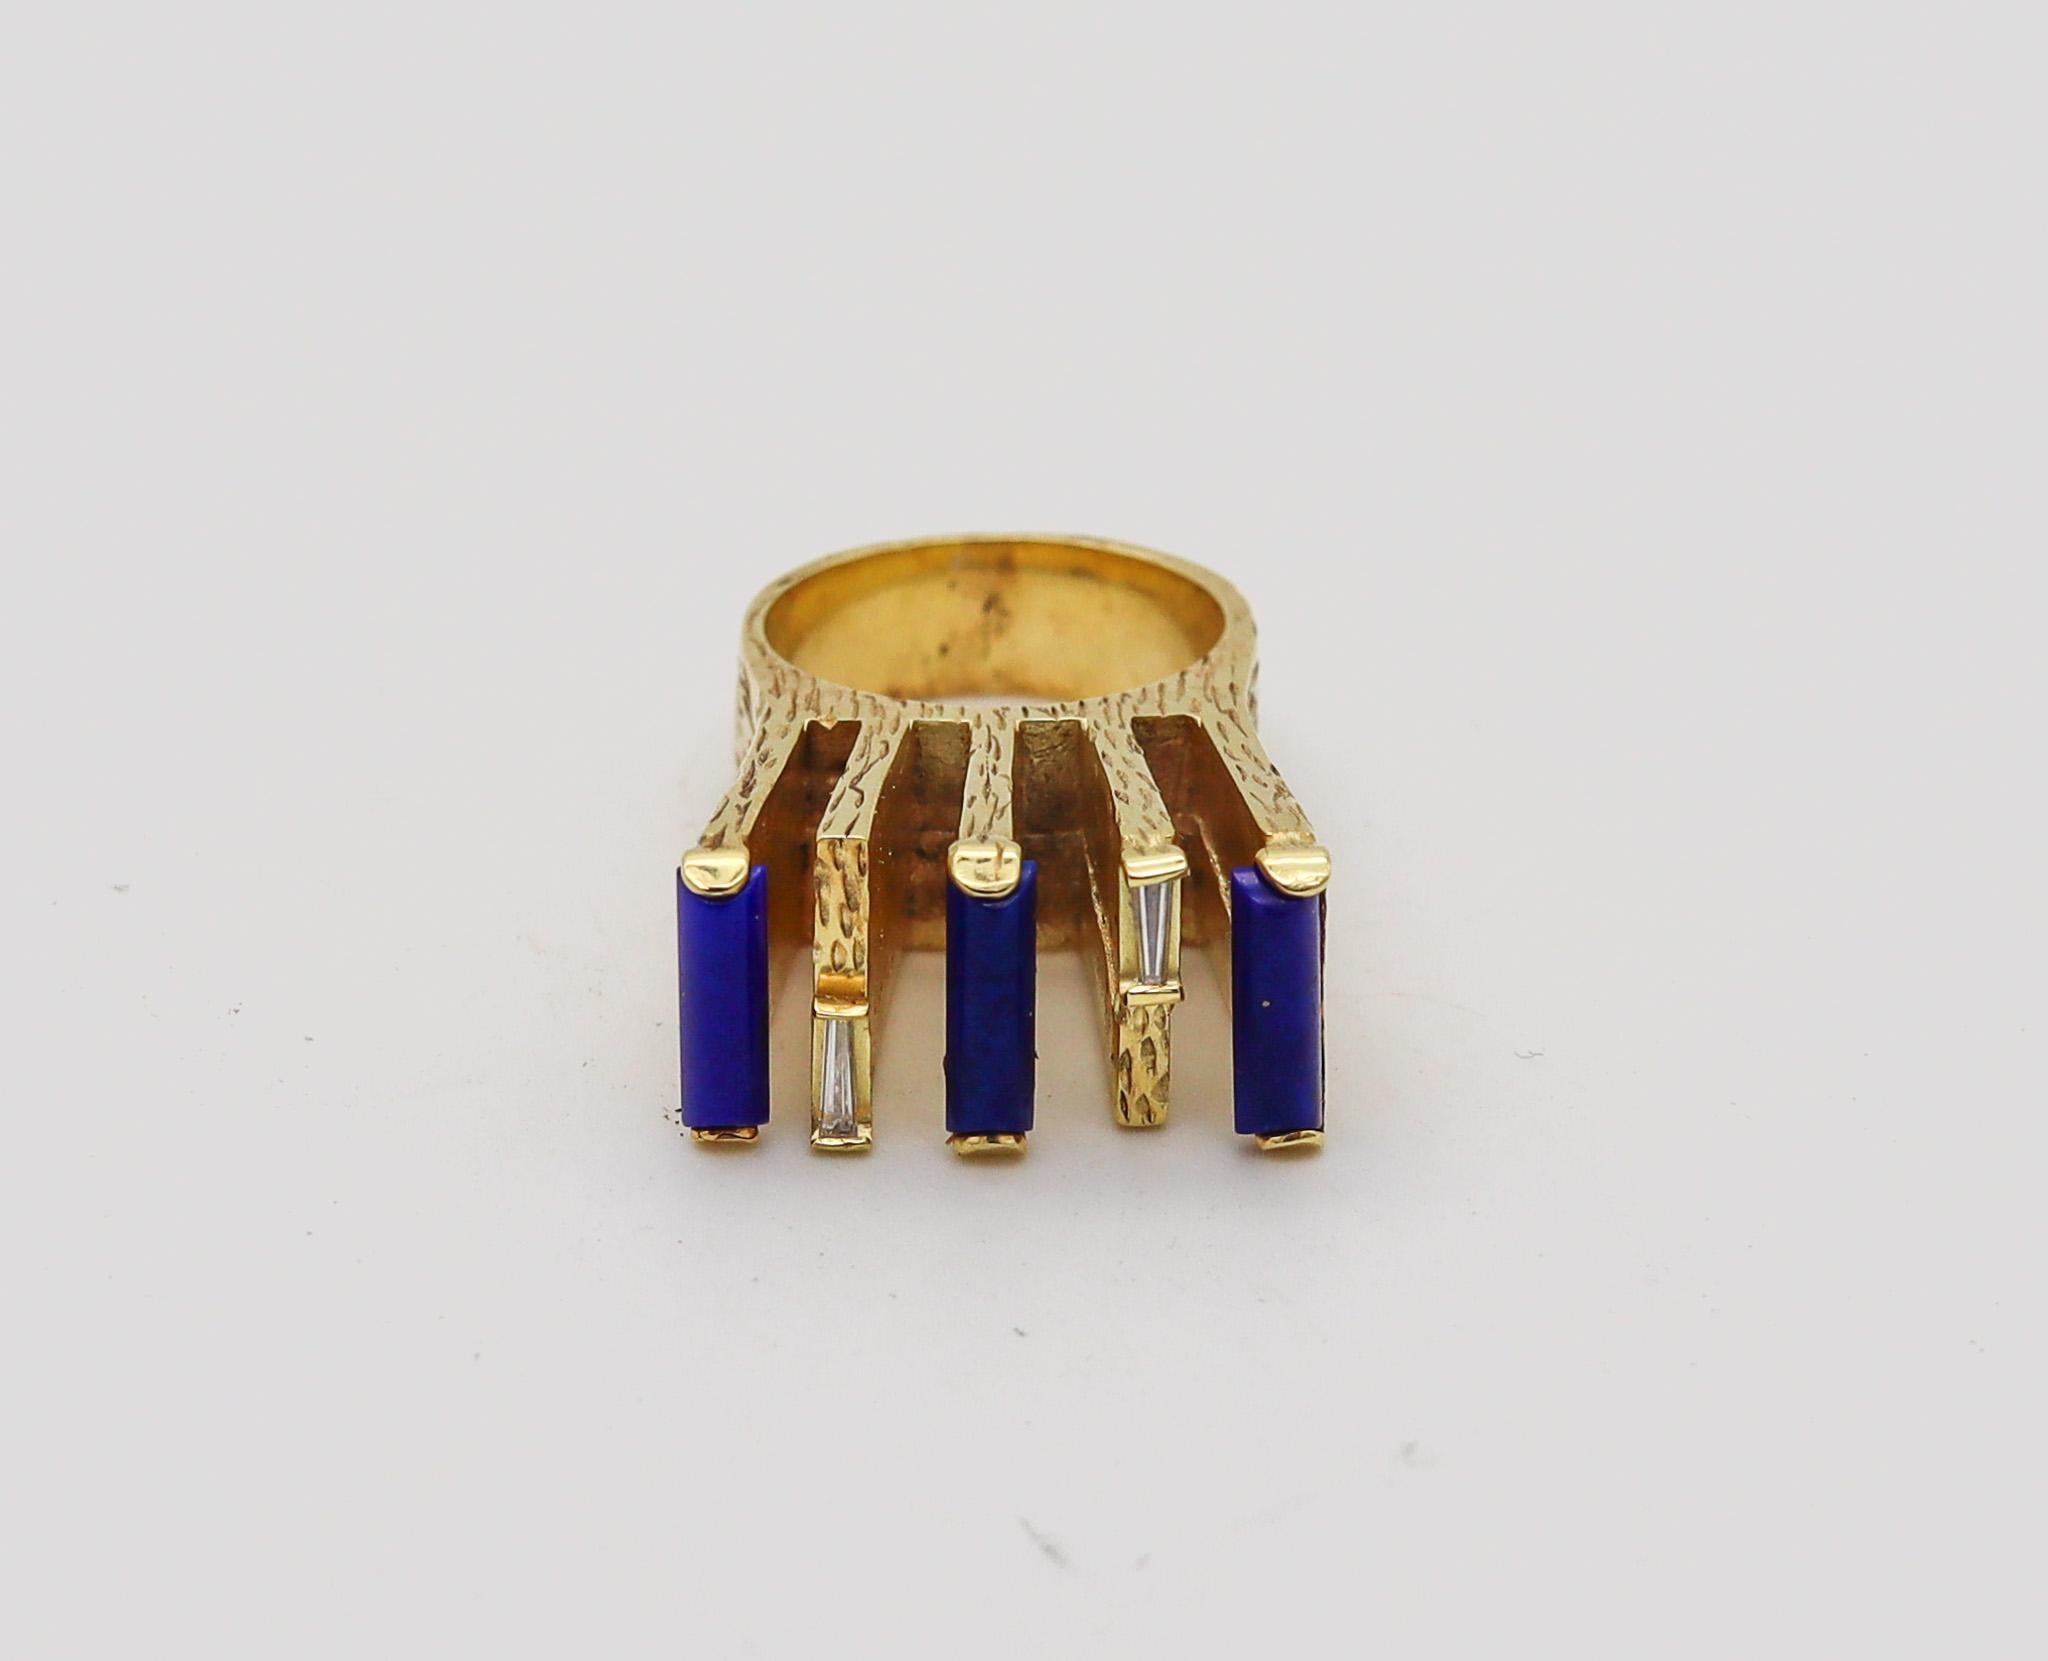 Modern Scandinavian 1970 Brutalism Ring In 14Kt Gold With Lapis And Diamonds For Sale